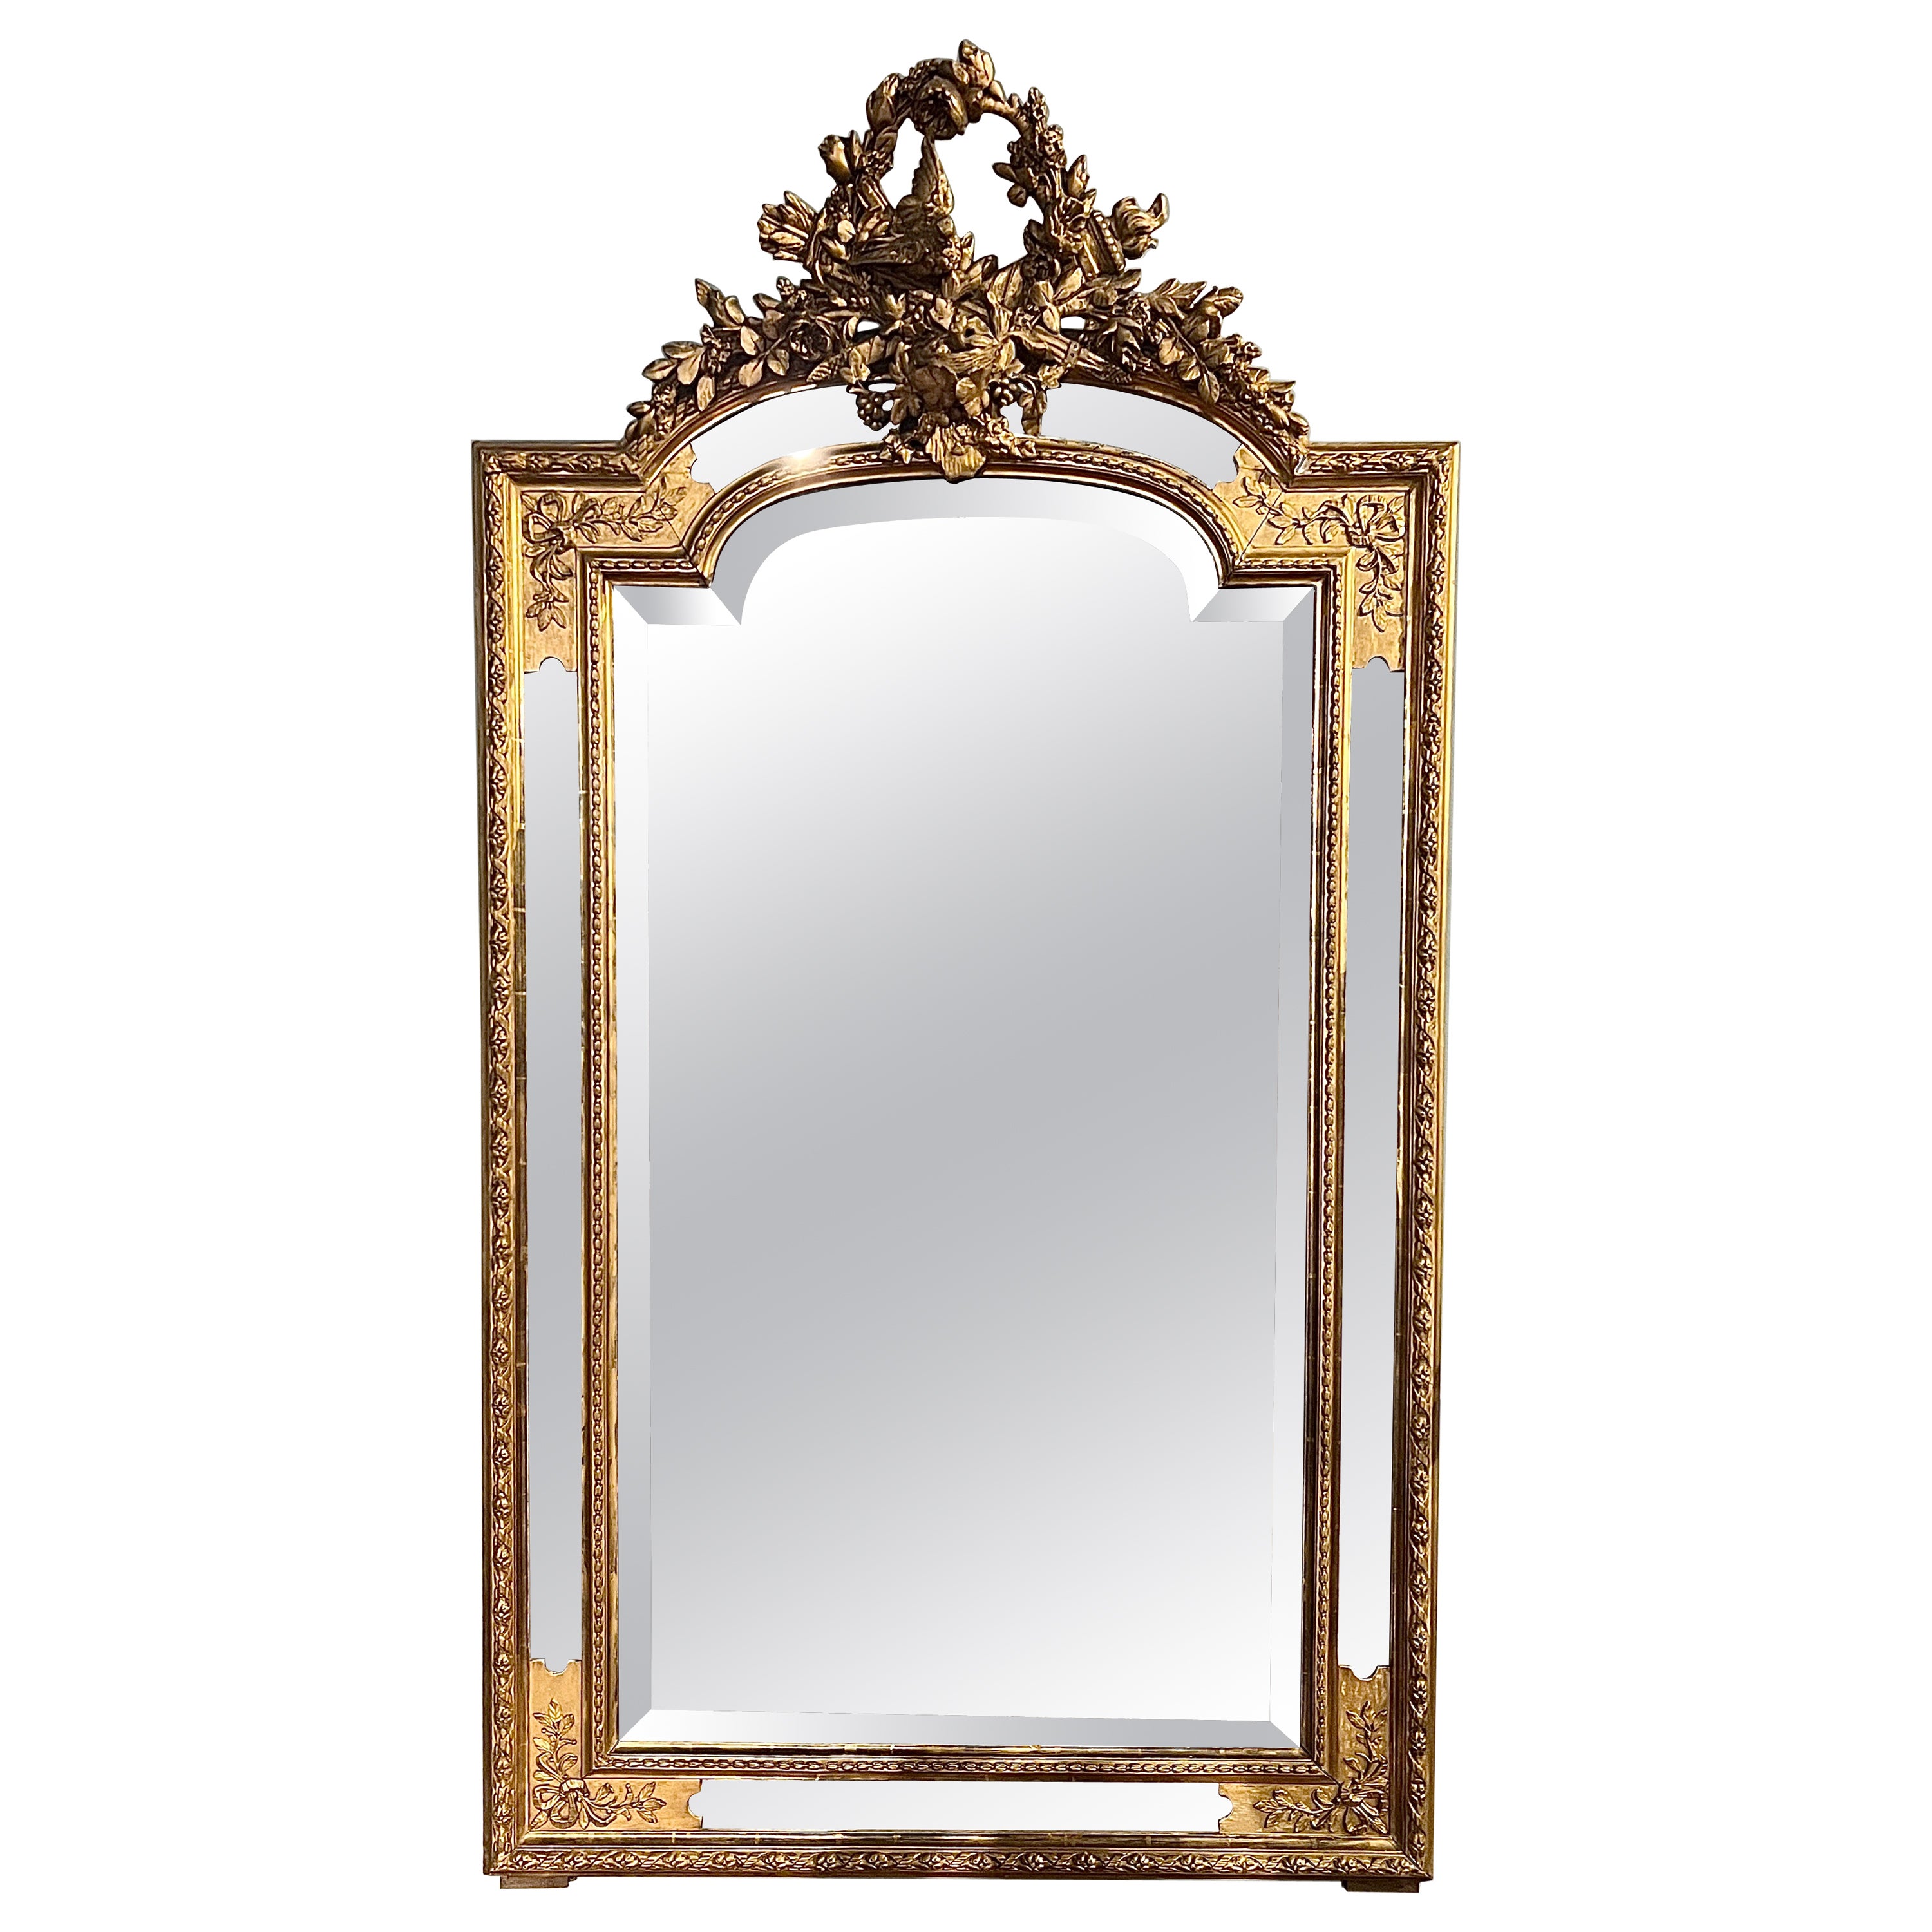 Antique French Louis XVI Carved Wood Frame with Gold-Leaf Beveled Mirror Ca 1890